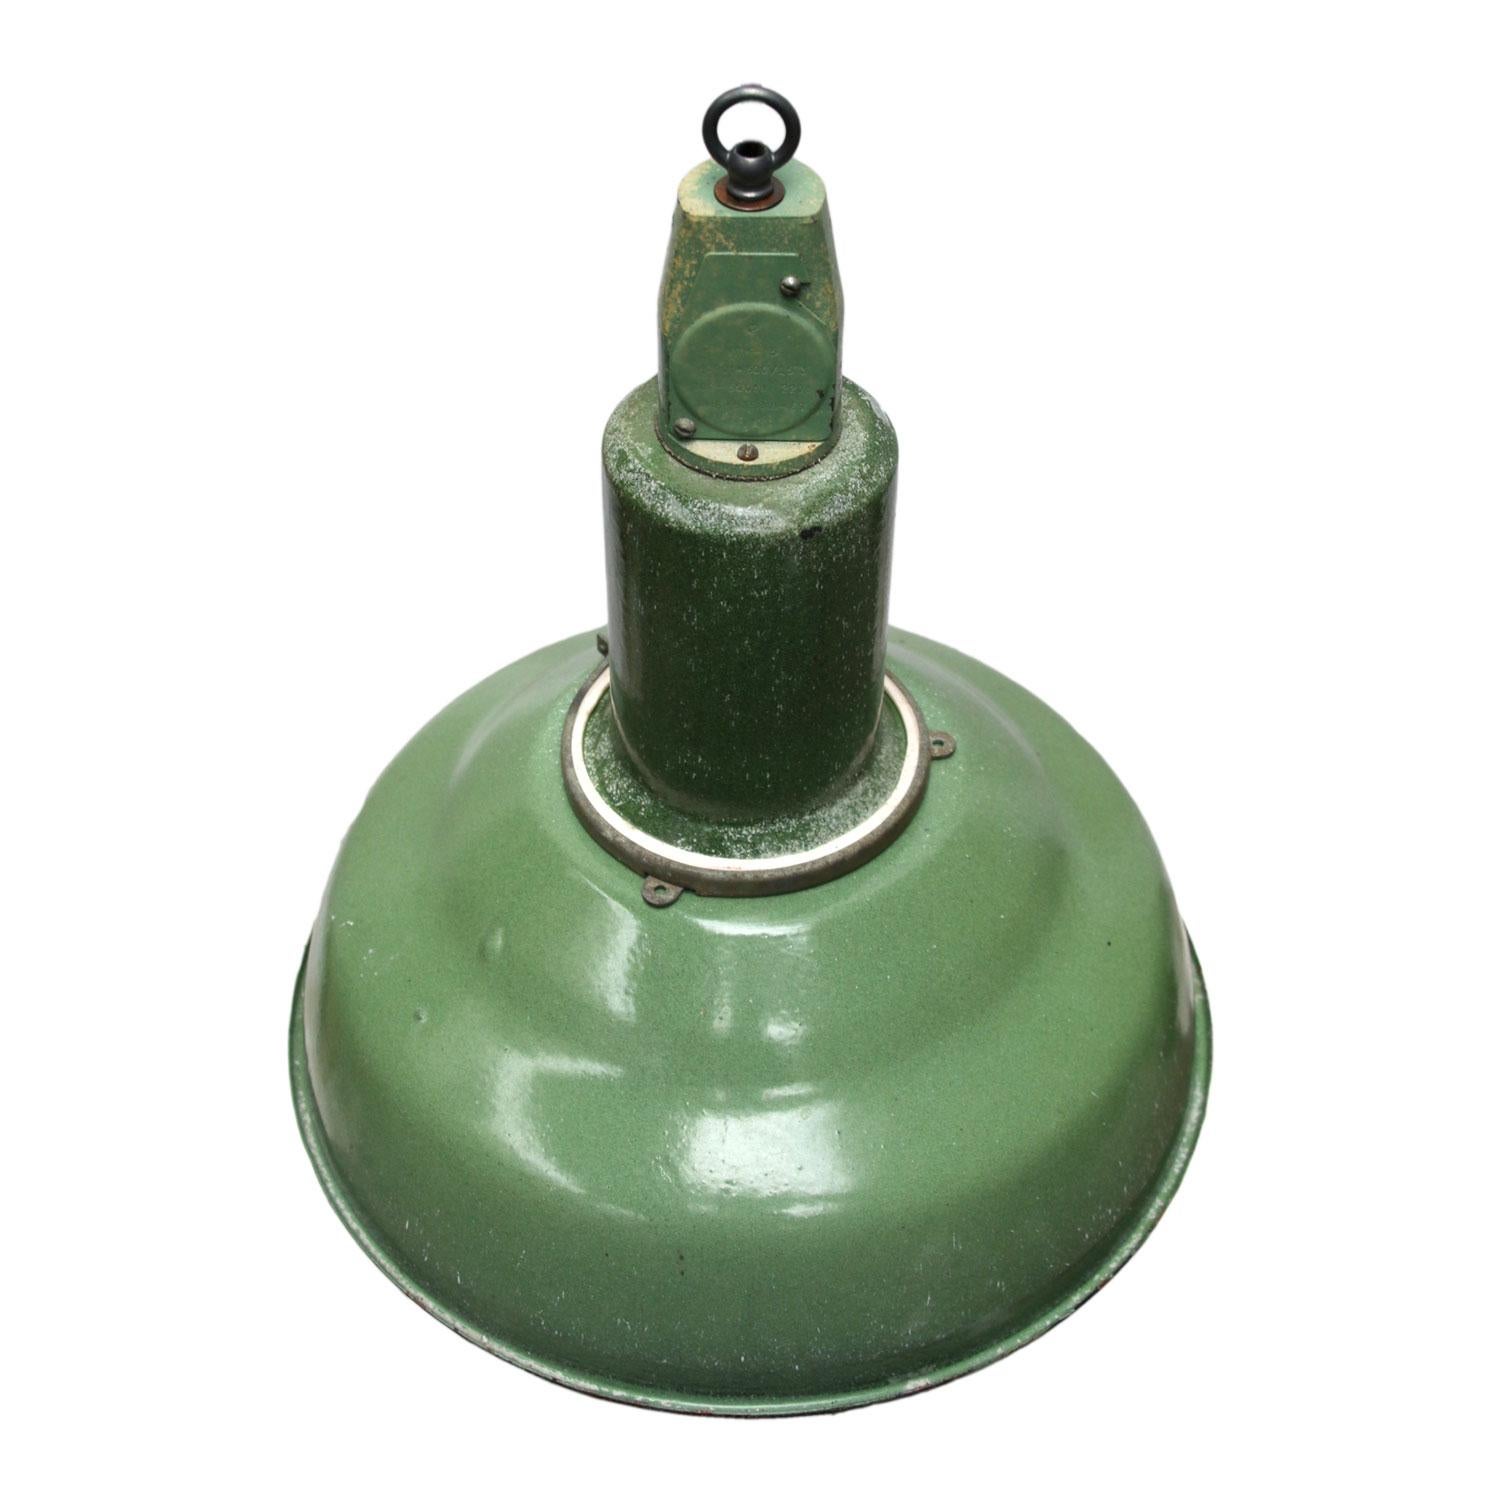 Enamel Industrial pendant
Light green enamel shade, white inside.
Green enamel top.

Weight: 2.70 kg / 6 lb

Priced per individual item. All lamps have been made suitable by international standards for incandescent light bulbs,